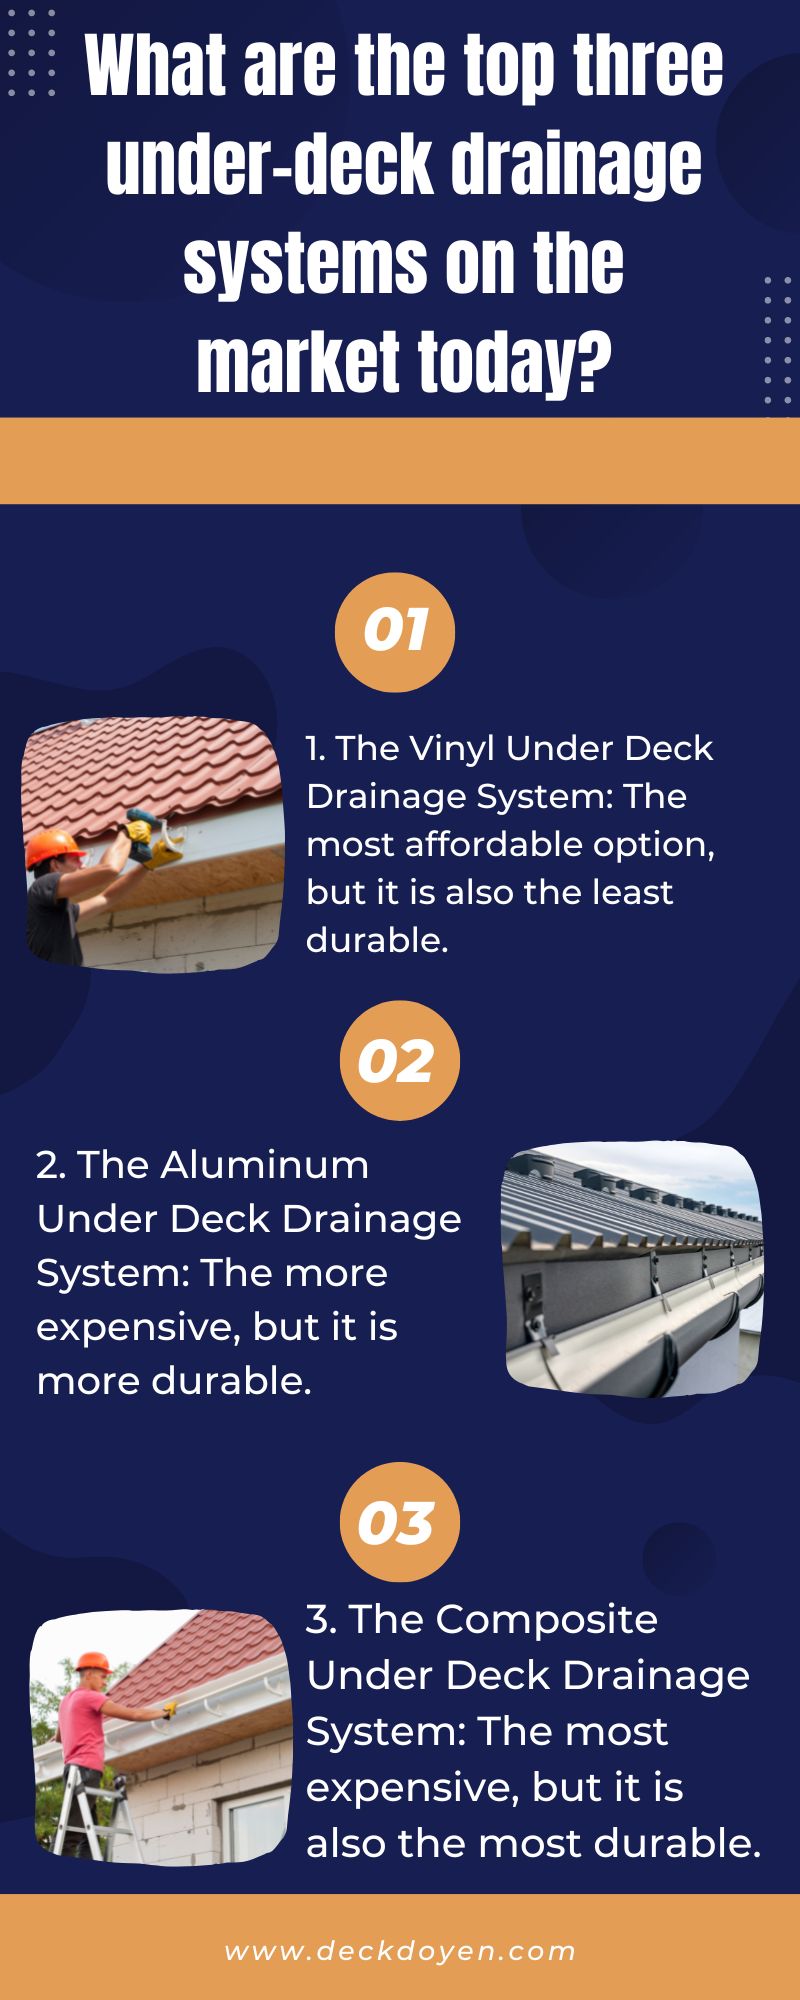 What are the top three under-deck drainage systems on the market today